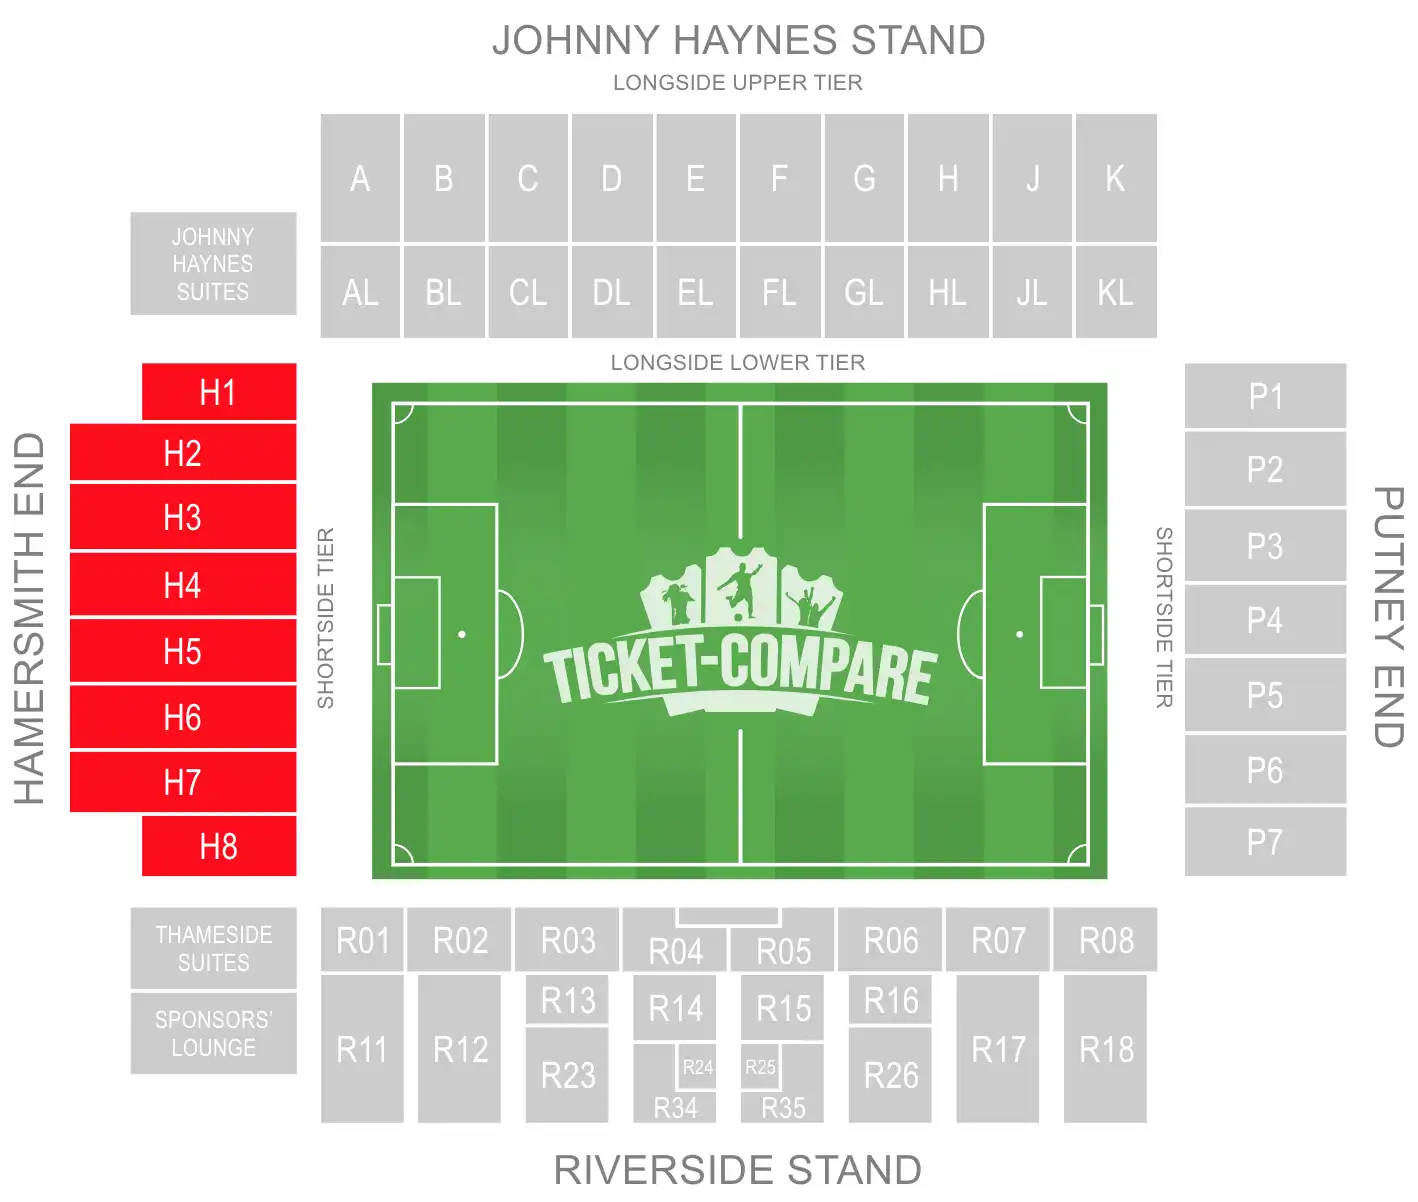 Craven Cottage Seating Plan with highligted the Hammersmith End